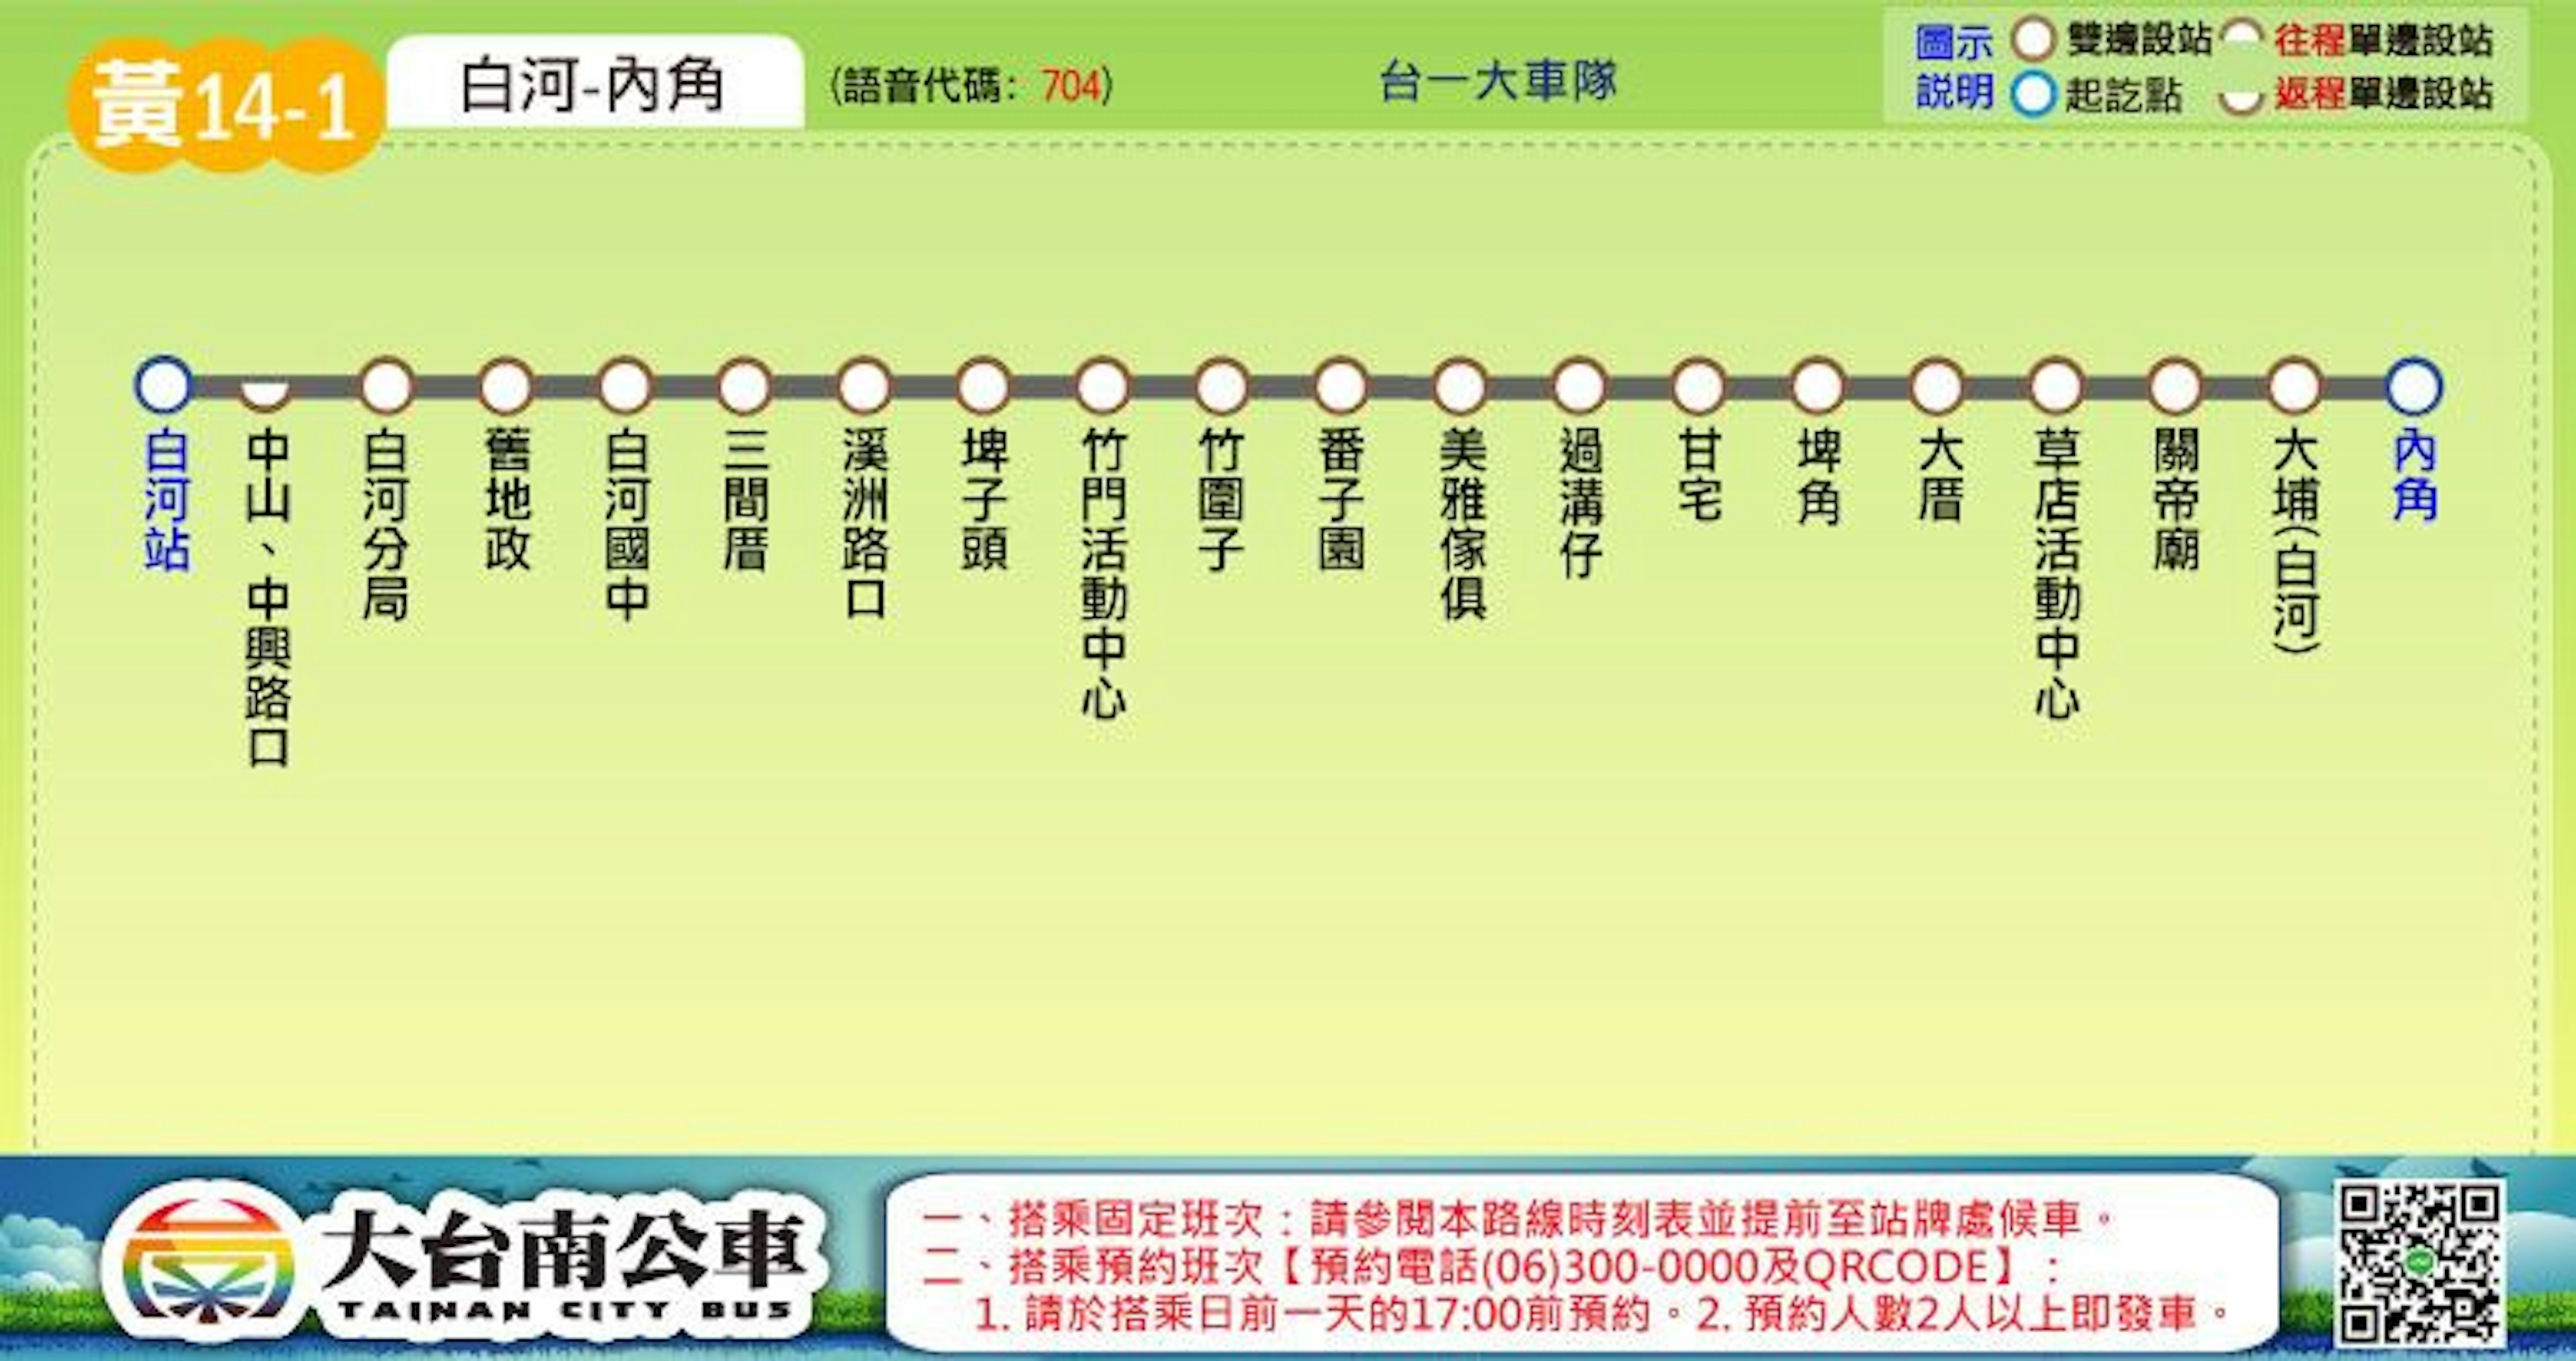 Y14-1Route Map-台南 Bus